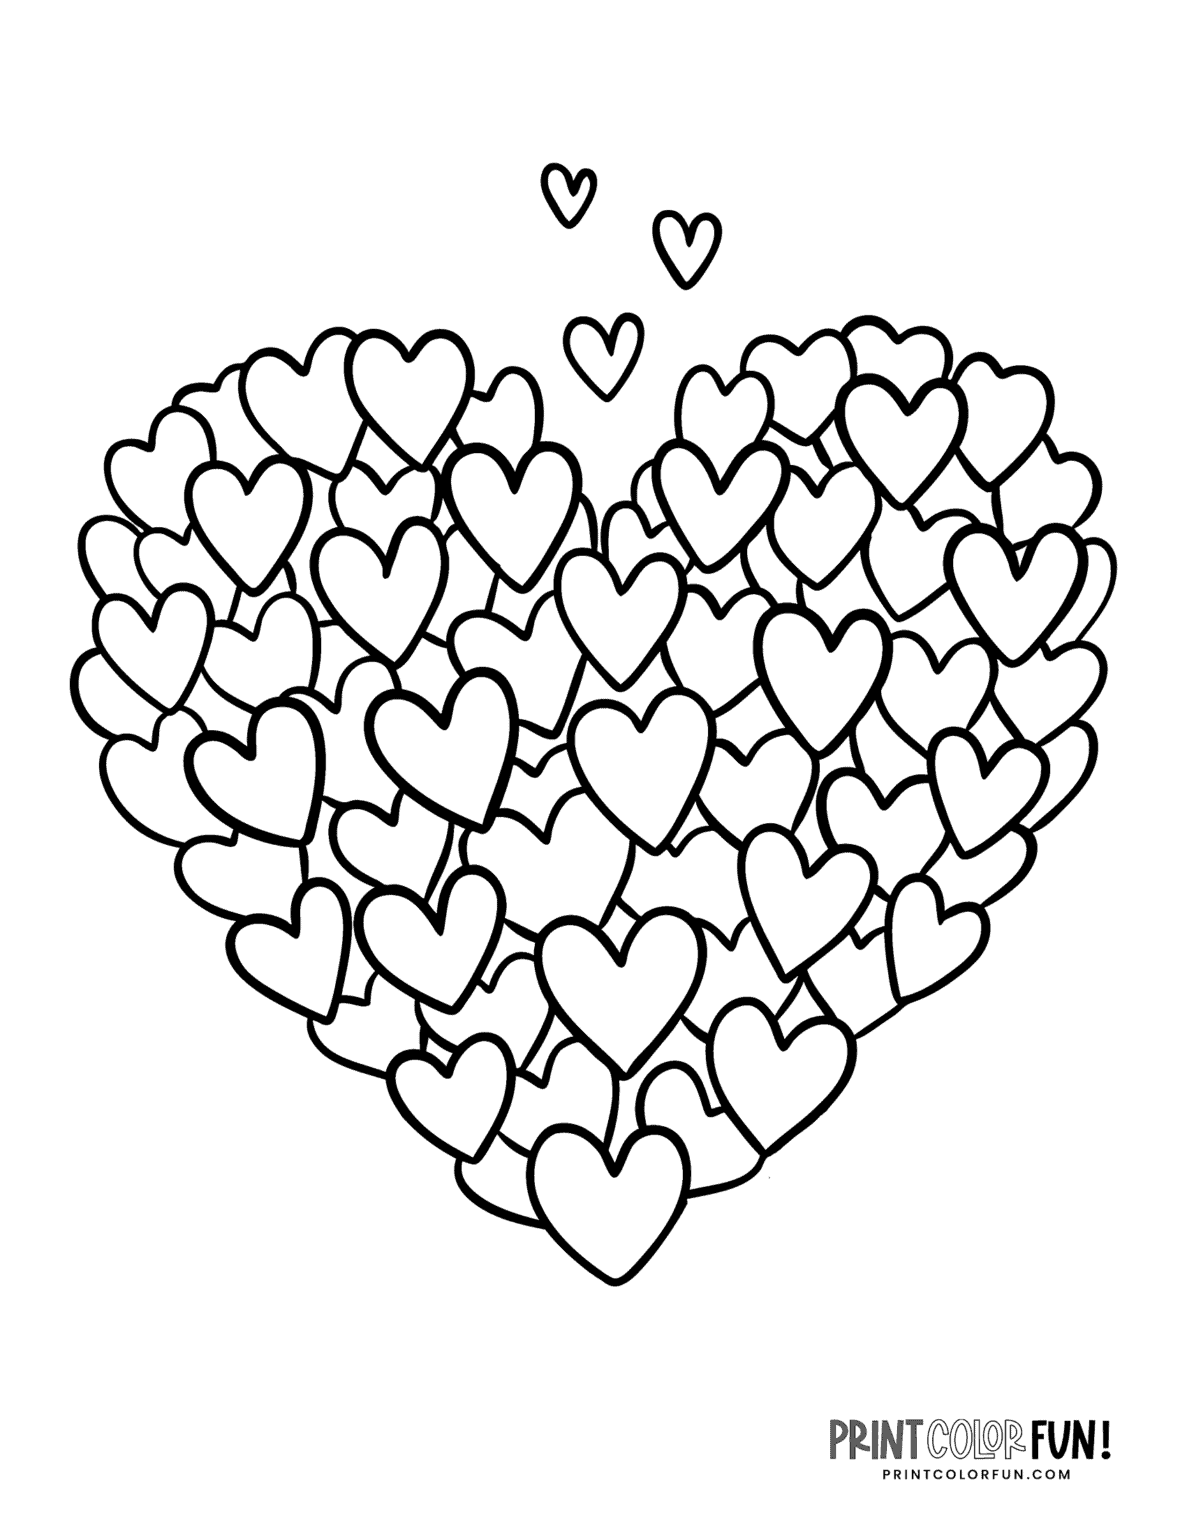 100 Printable Heart Coloring Pages A Huge Collection Of Hearts For 